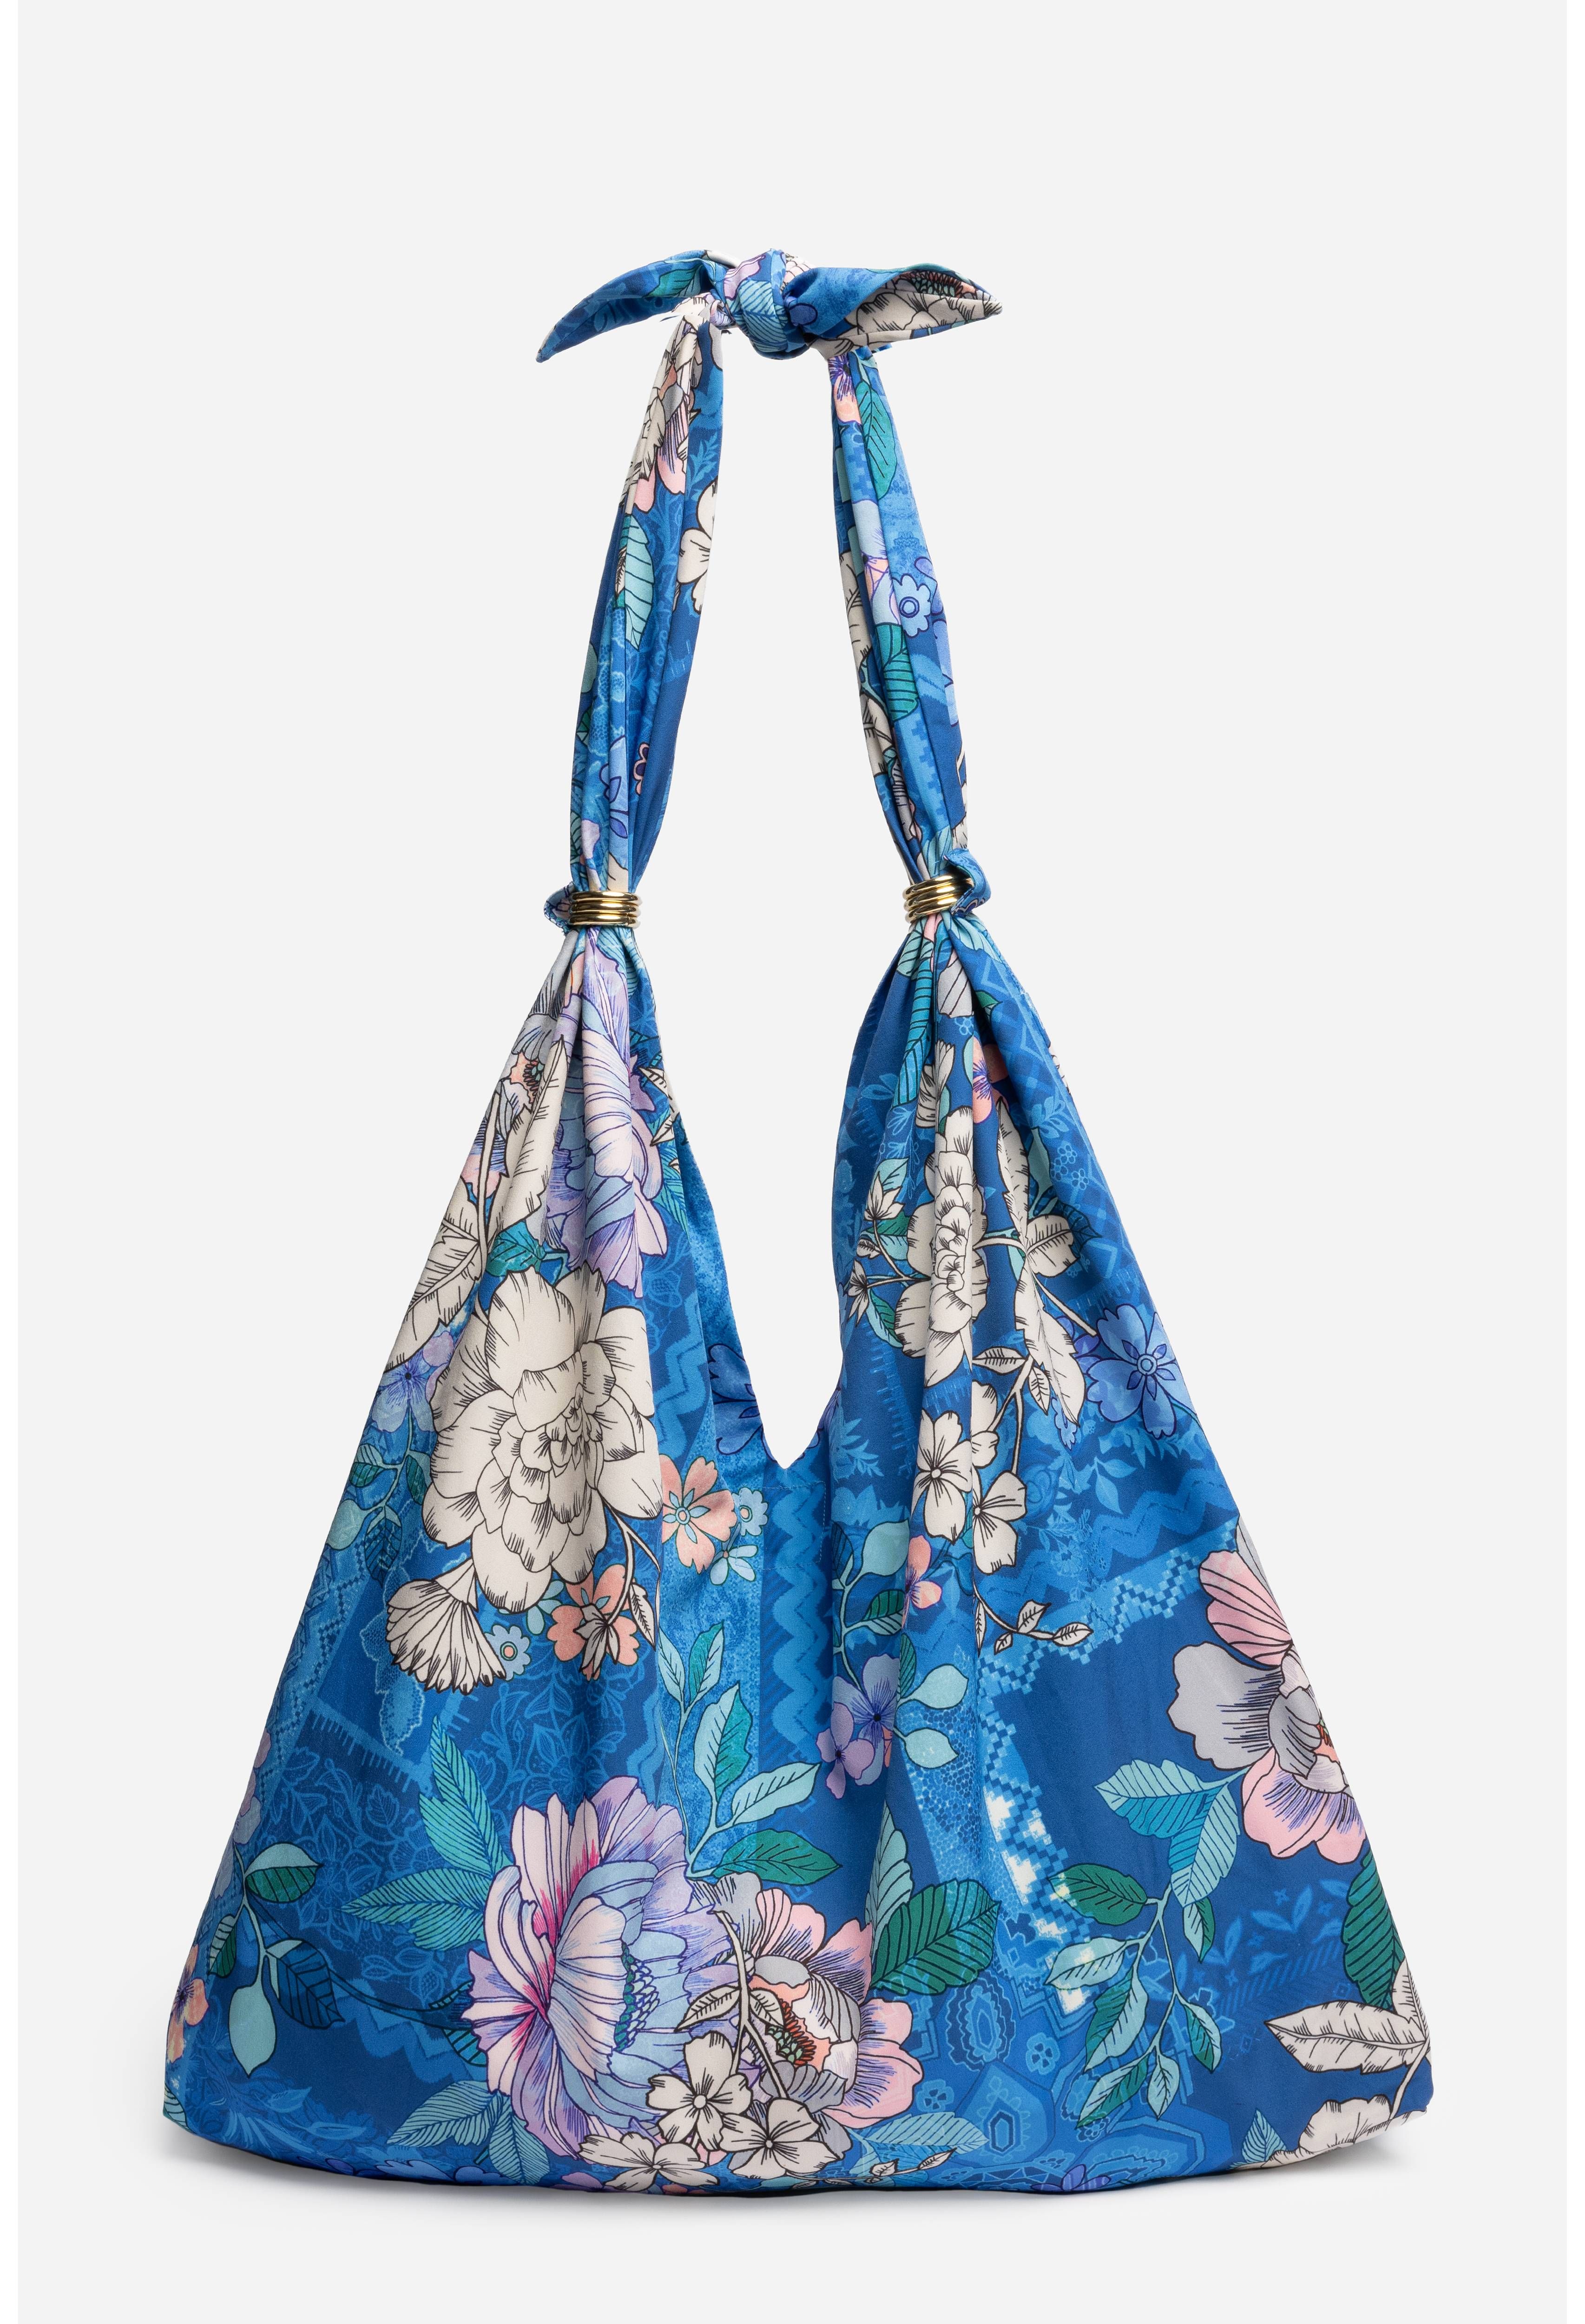 BLUE DOVE RING BEACH BAG | Johnny Was | Johnny Was